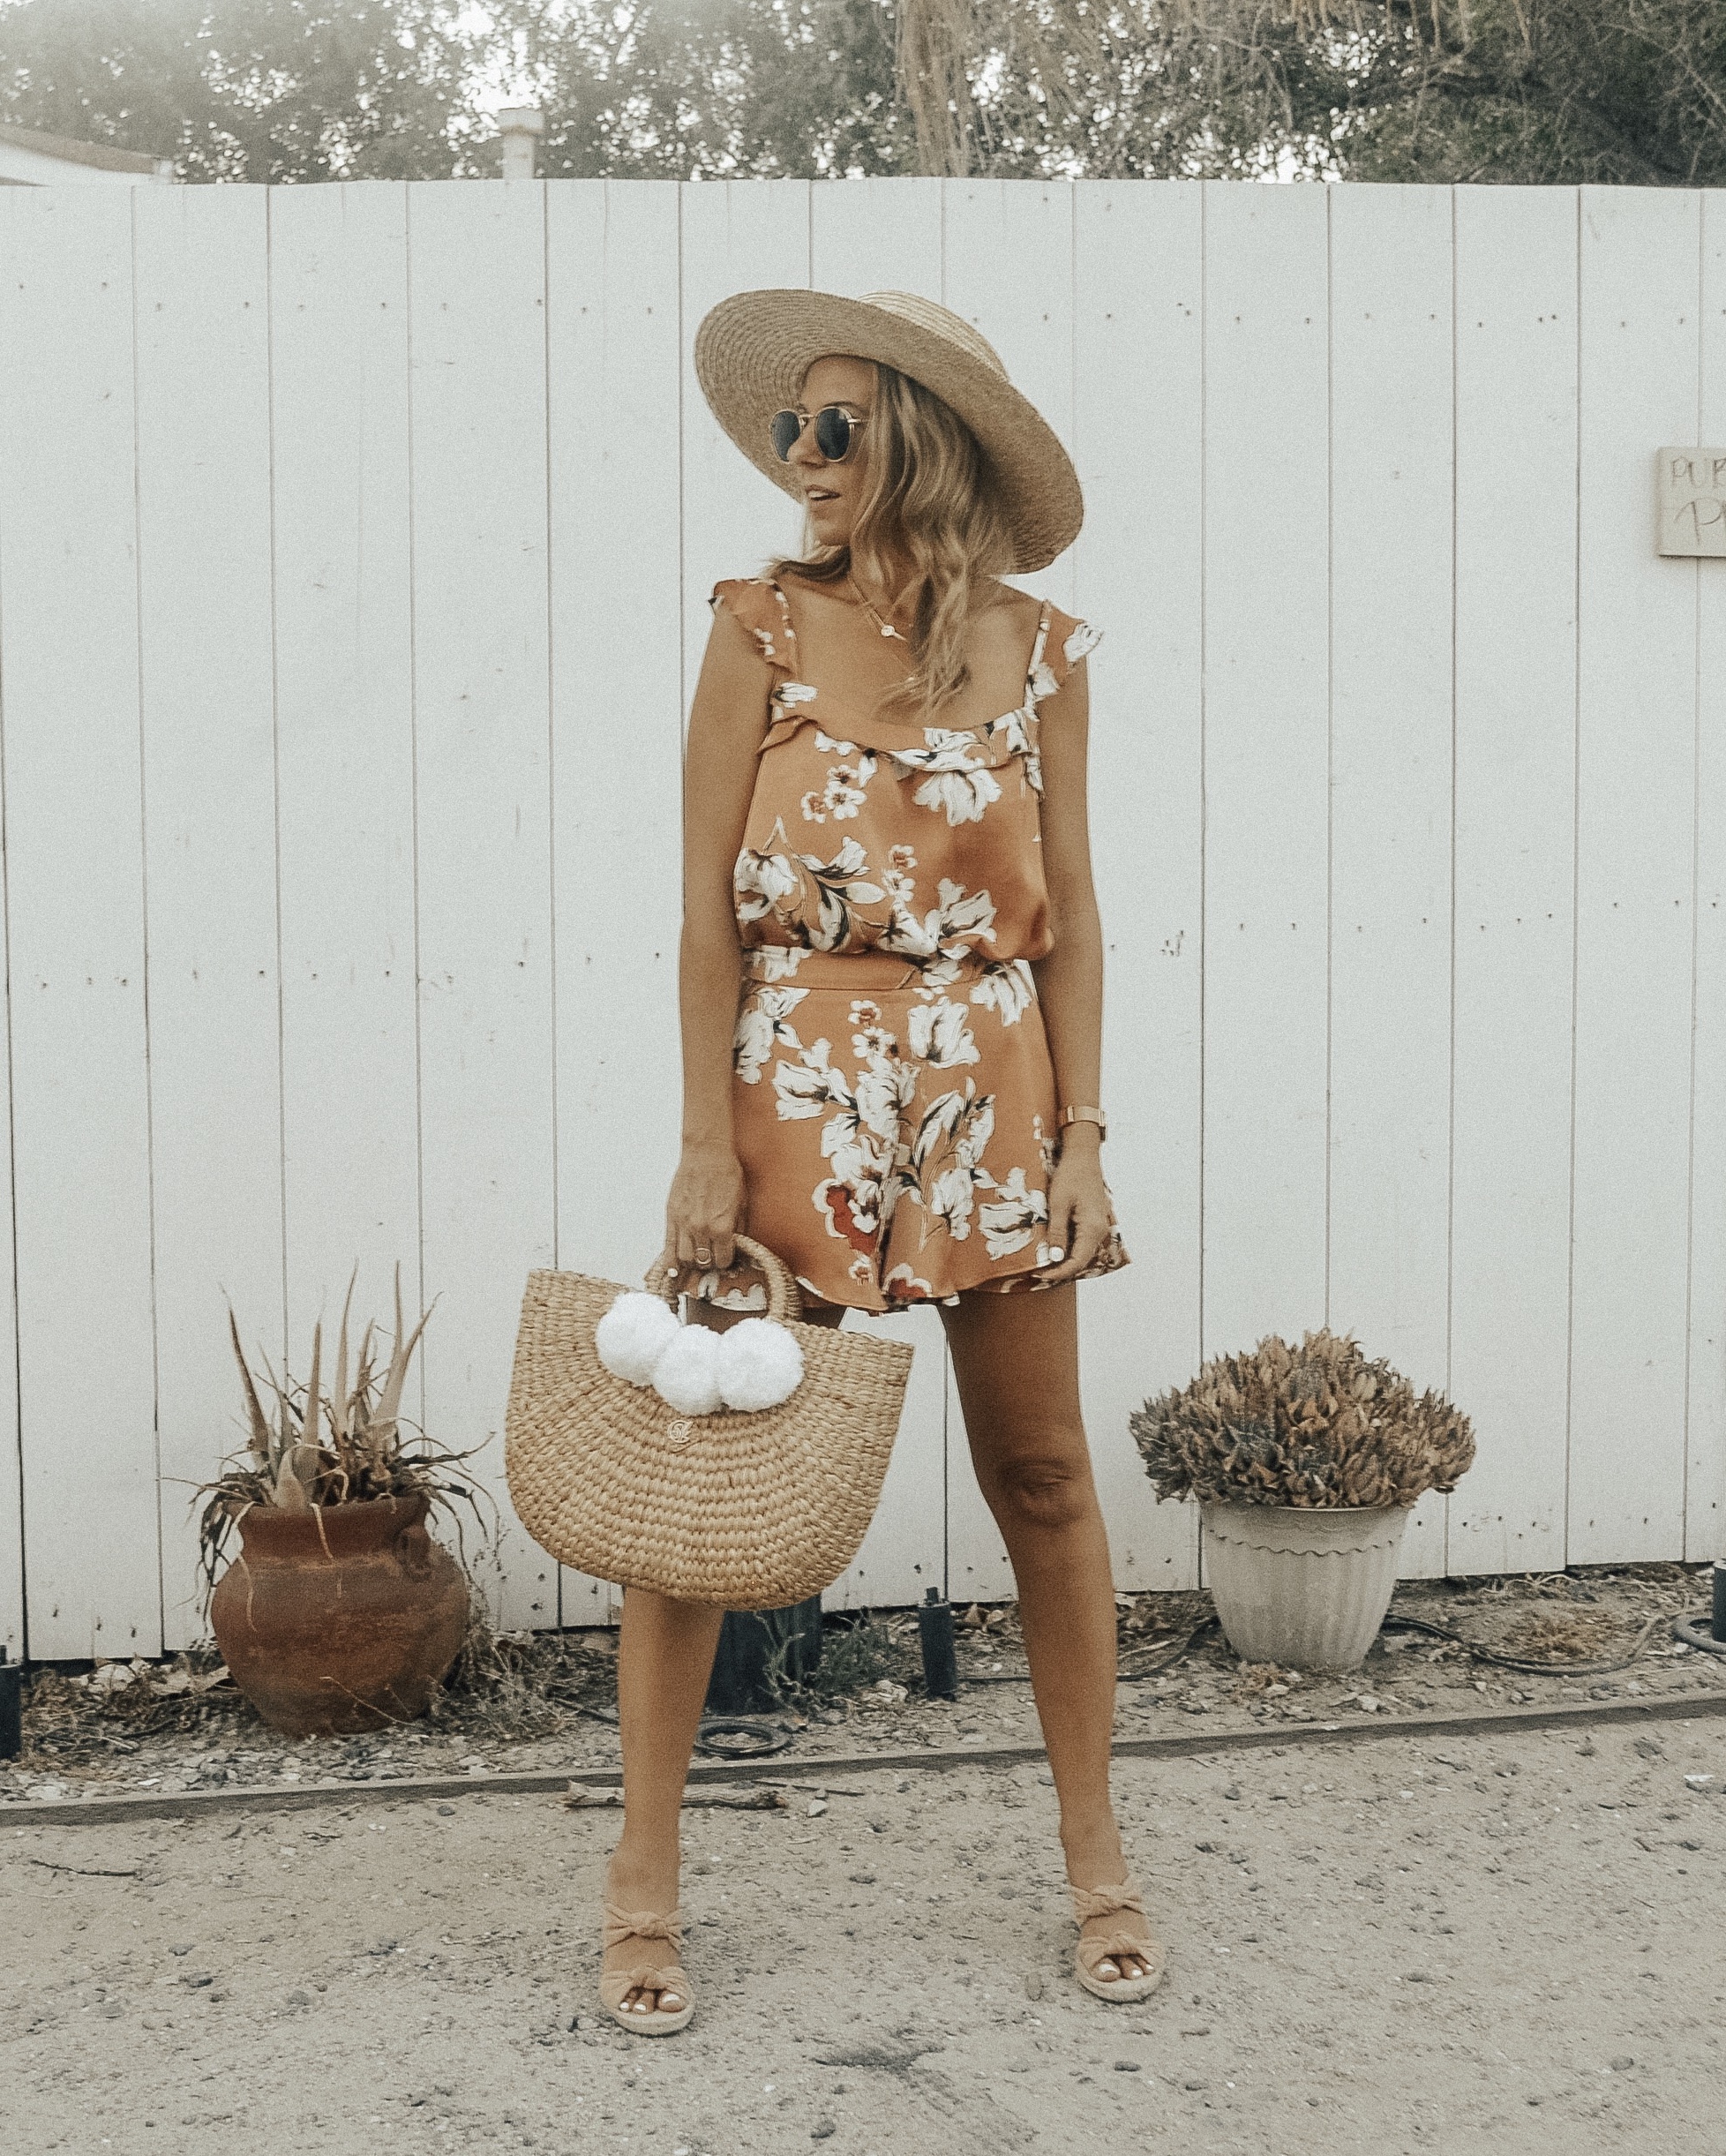 MATCHING SETS WITH BISHOP + YOUNG - Jaclyn De Leon Style + floral ruffle shorts + floral tank top + bohemian + straw bag with pom poms + straw beach hat + summer style + casual street style + boho chic + Nordstrom + Zappos + Versatility of matching sets + mix and match